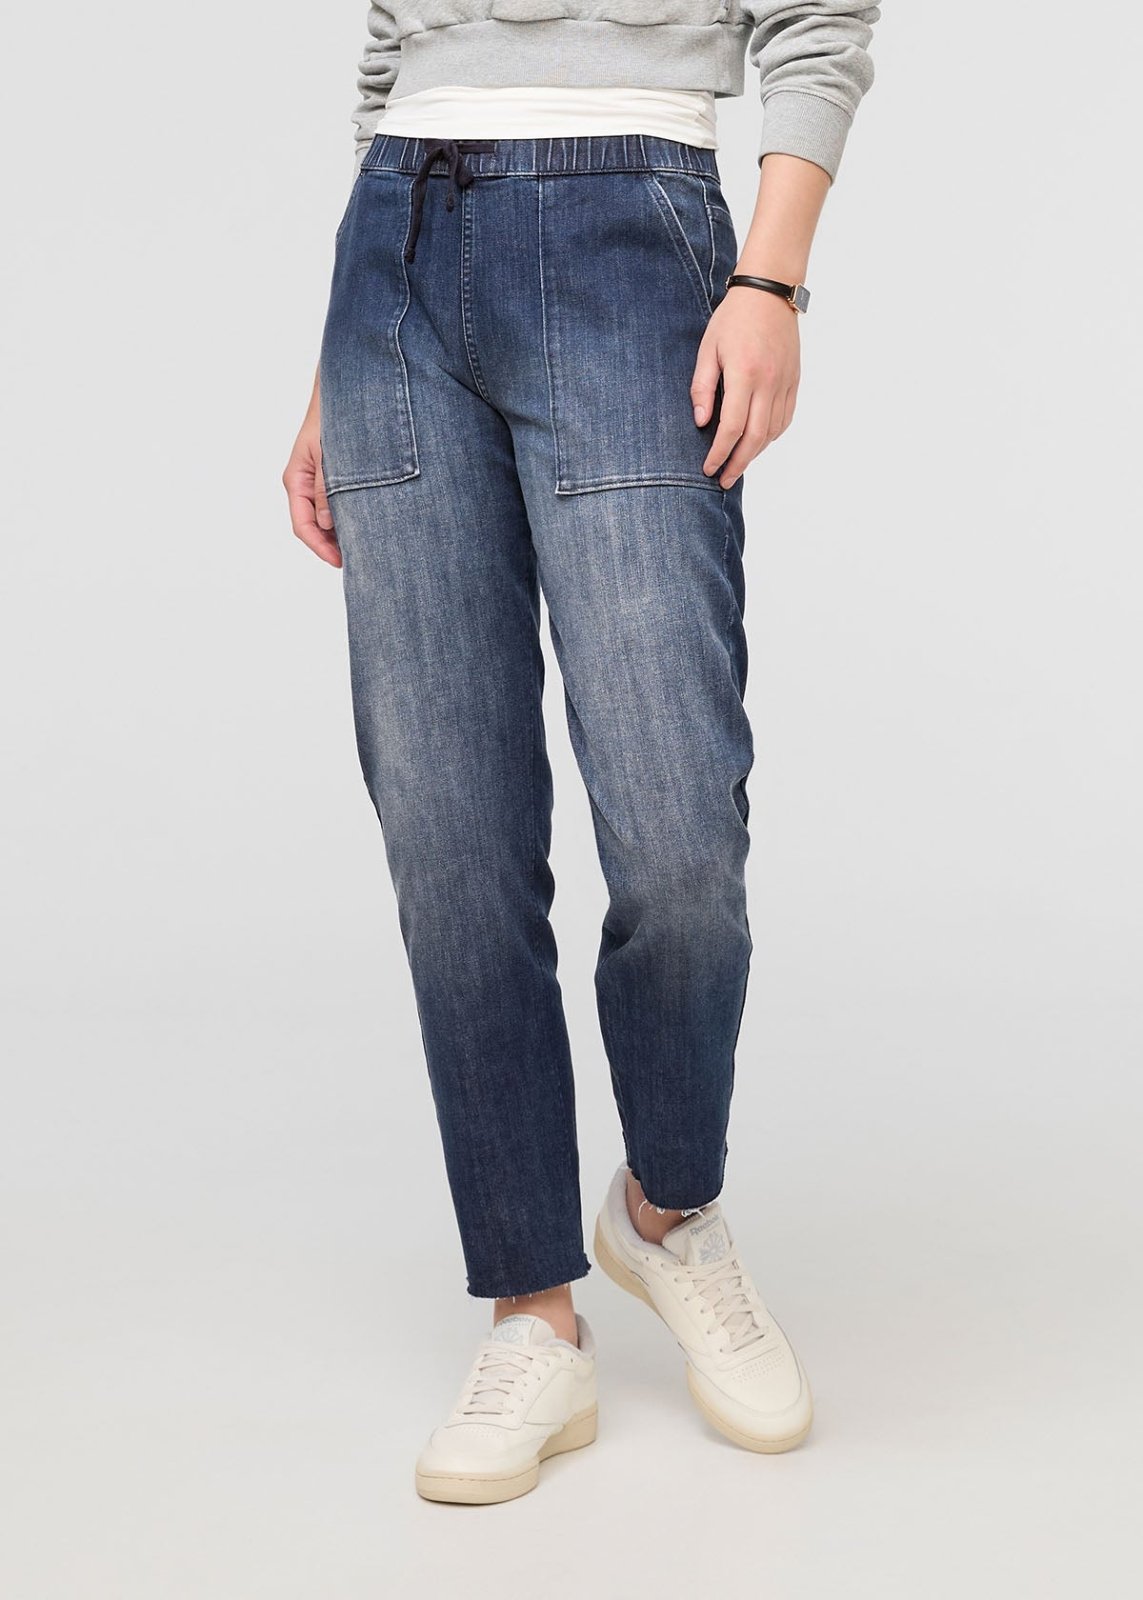 womens dark blue relaxed pull on denim pants front